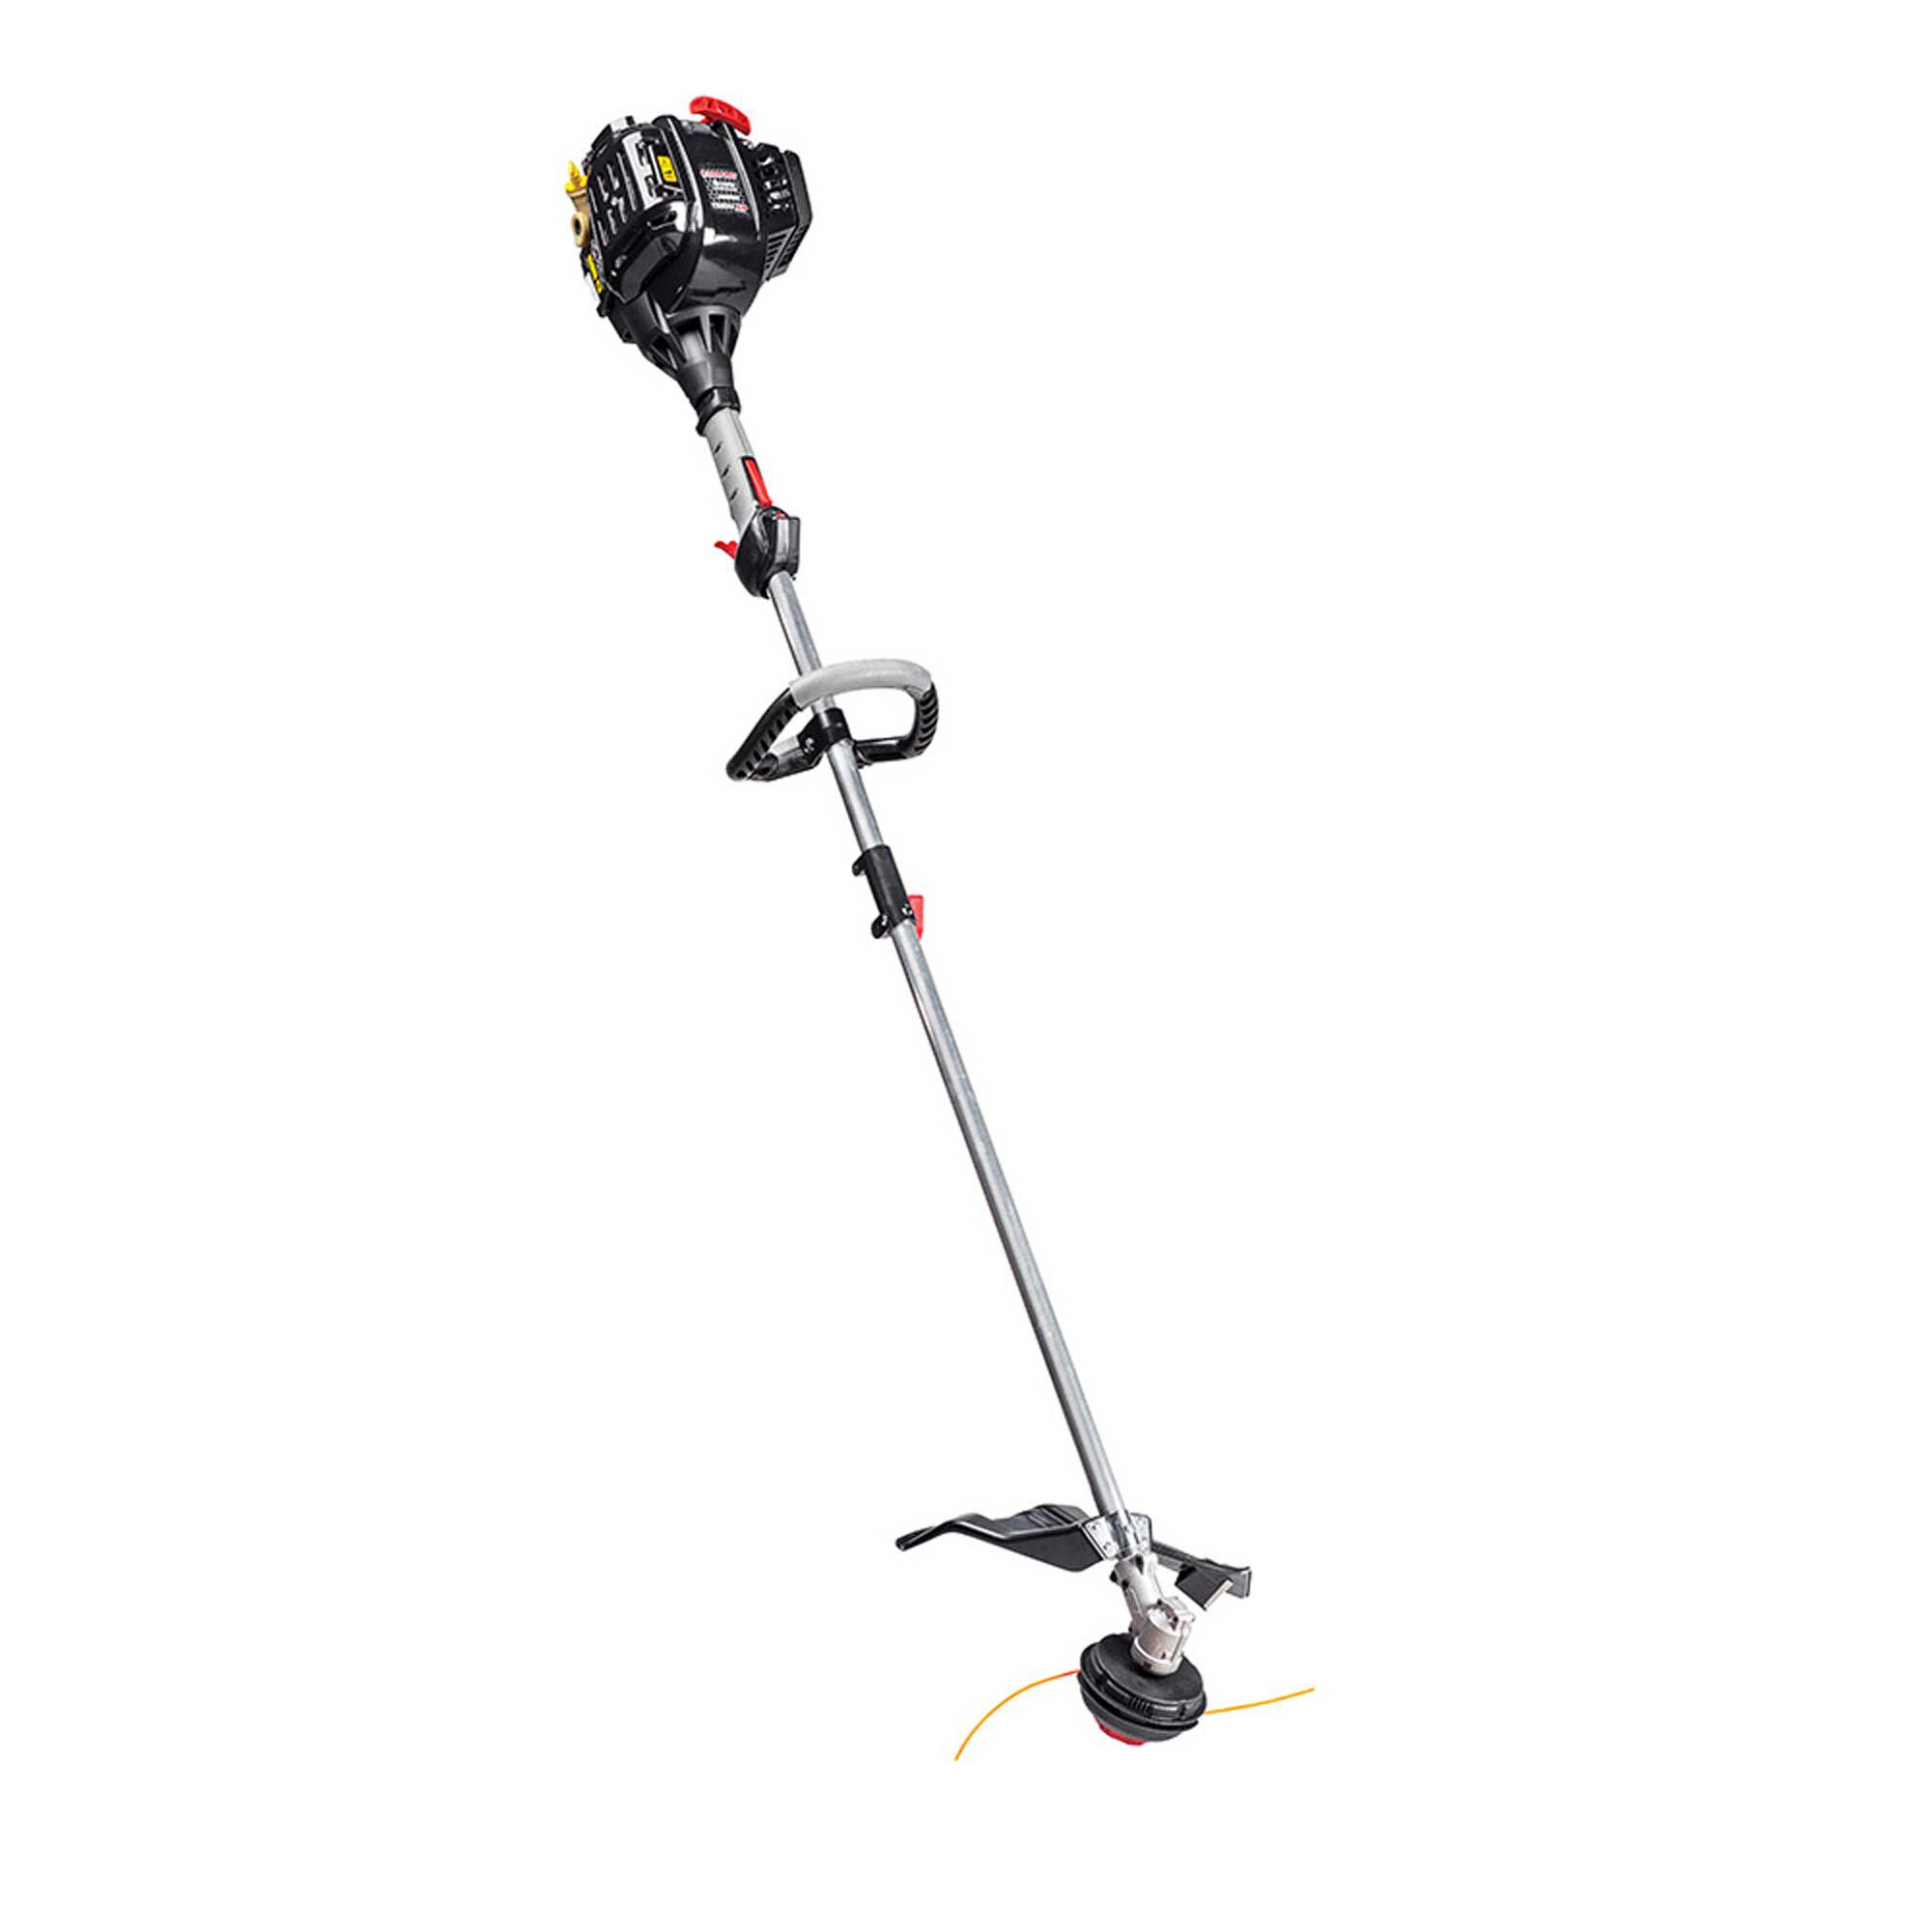 troy bilt 4 cycle trimmer